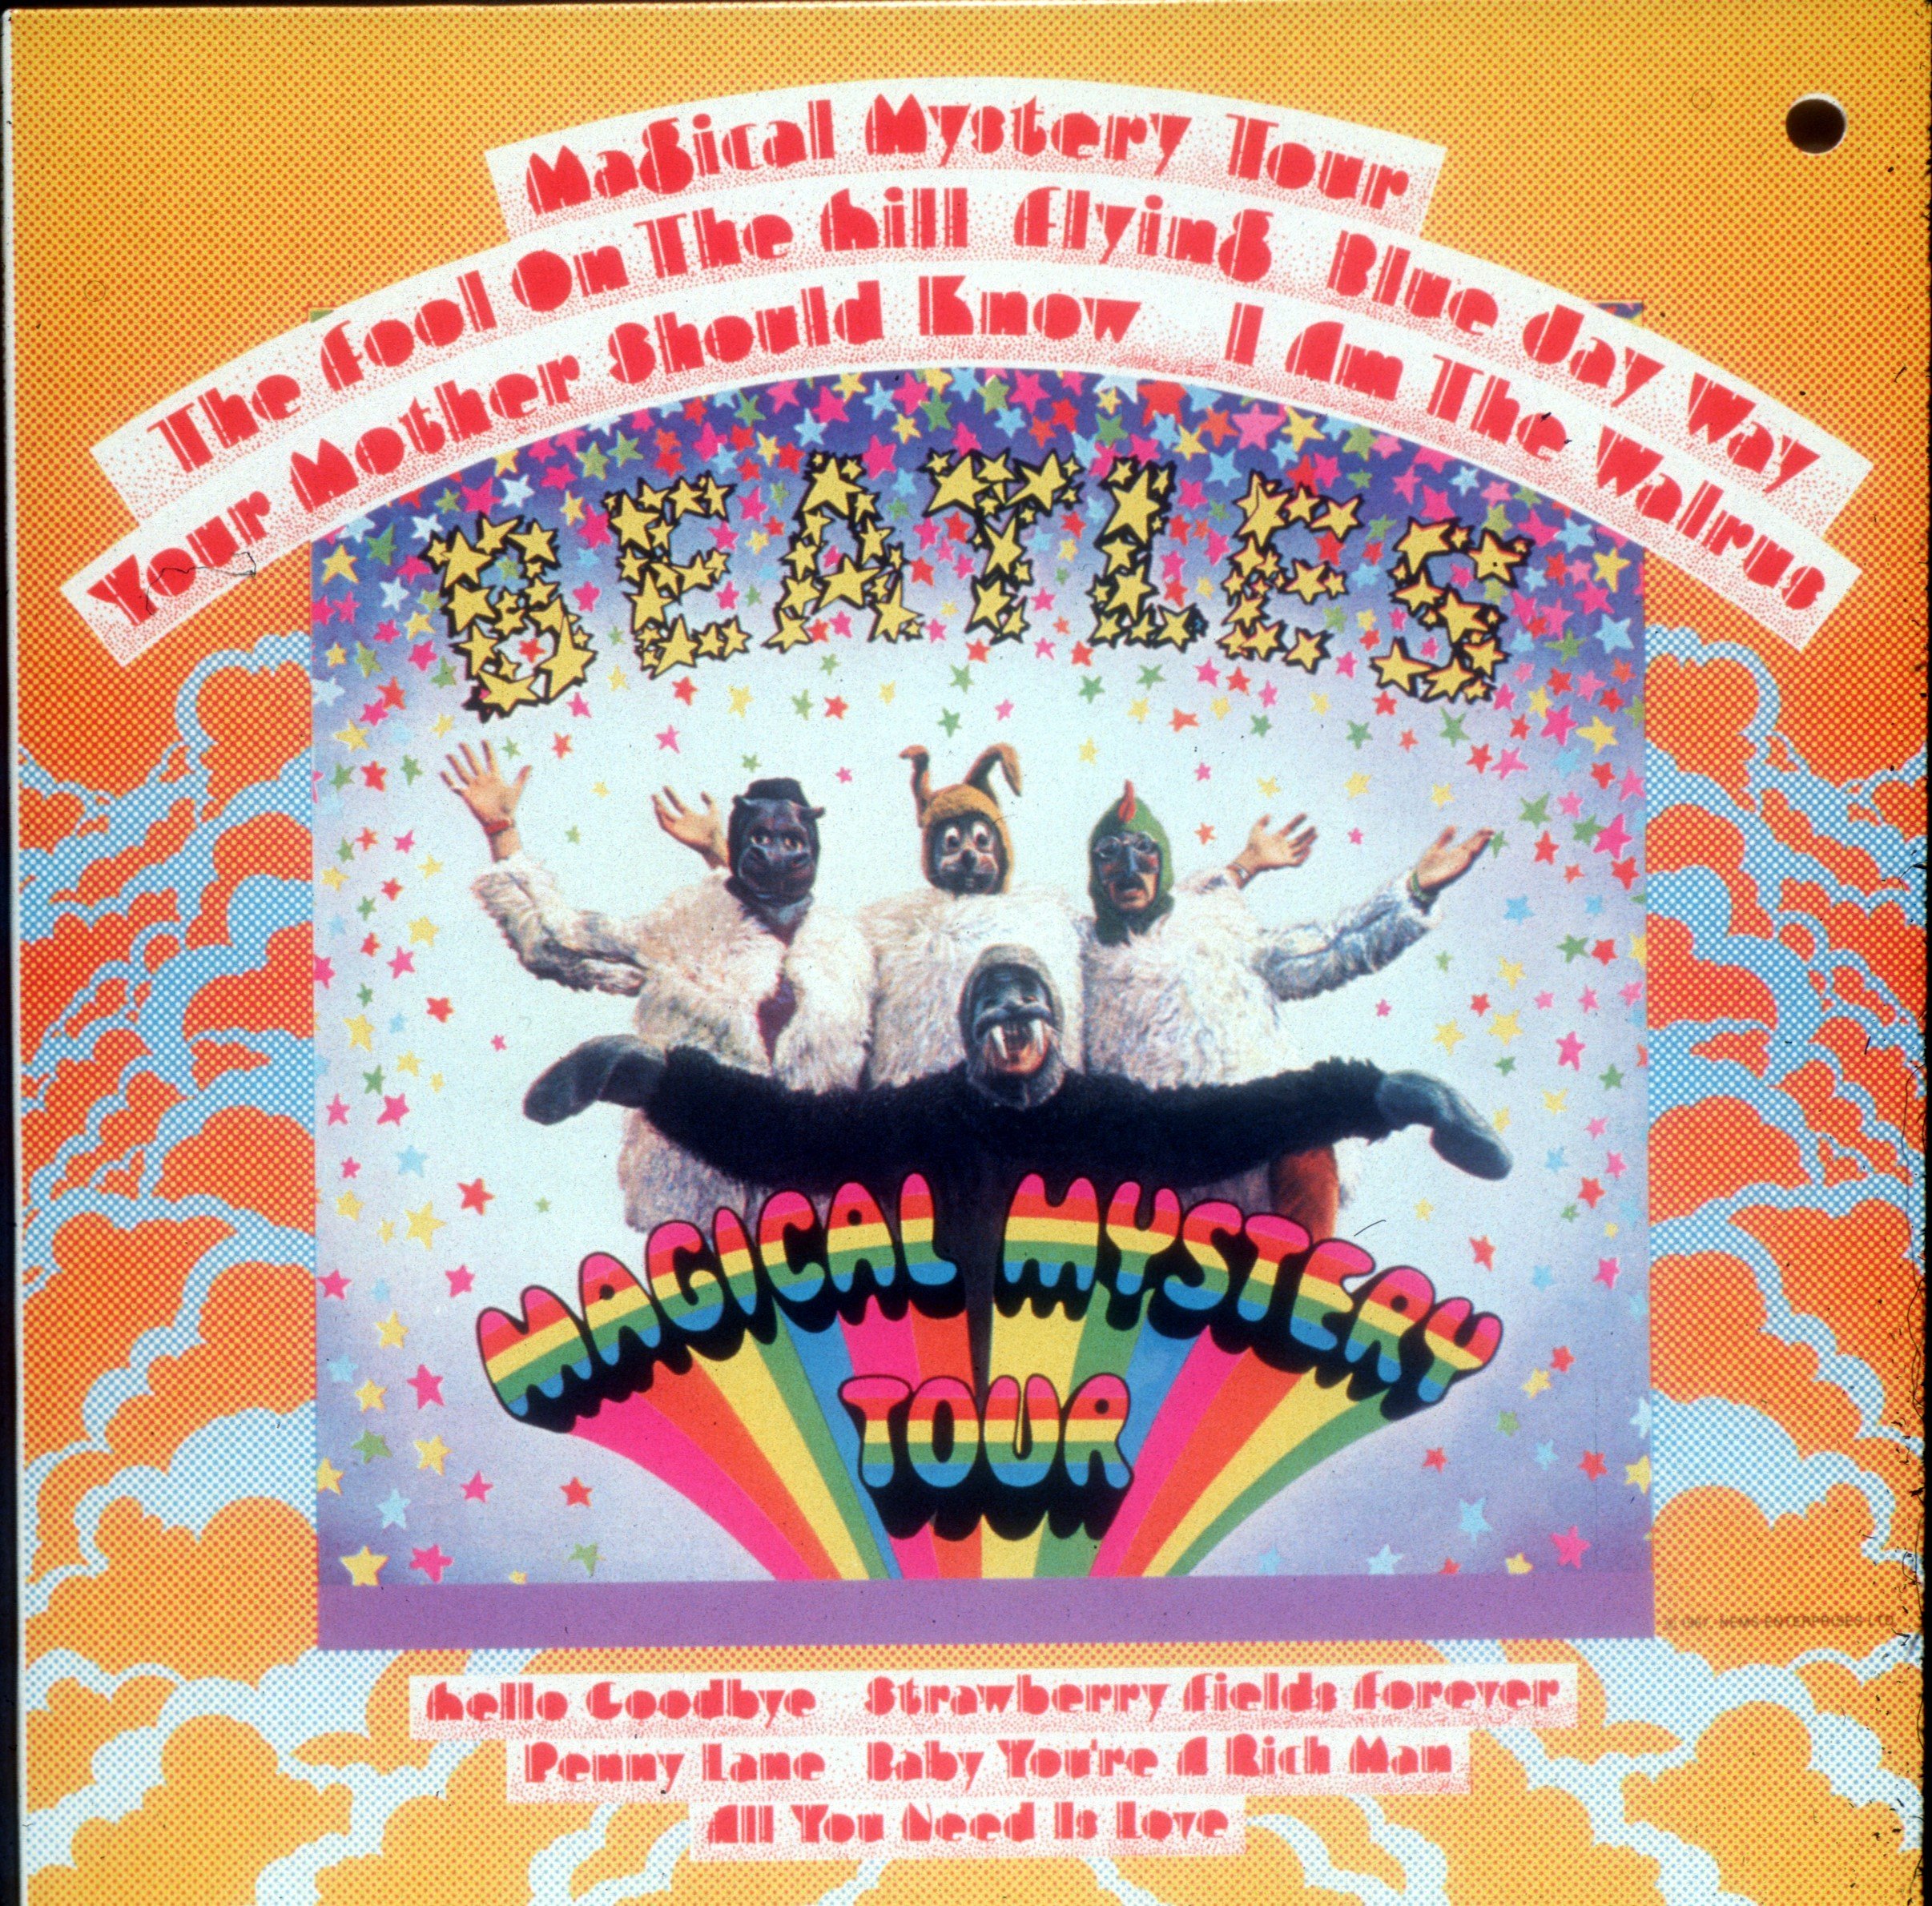 A vinyl copy of The Beatles' 'Magical Mystery Tour'